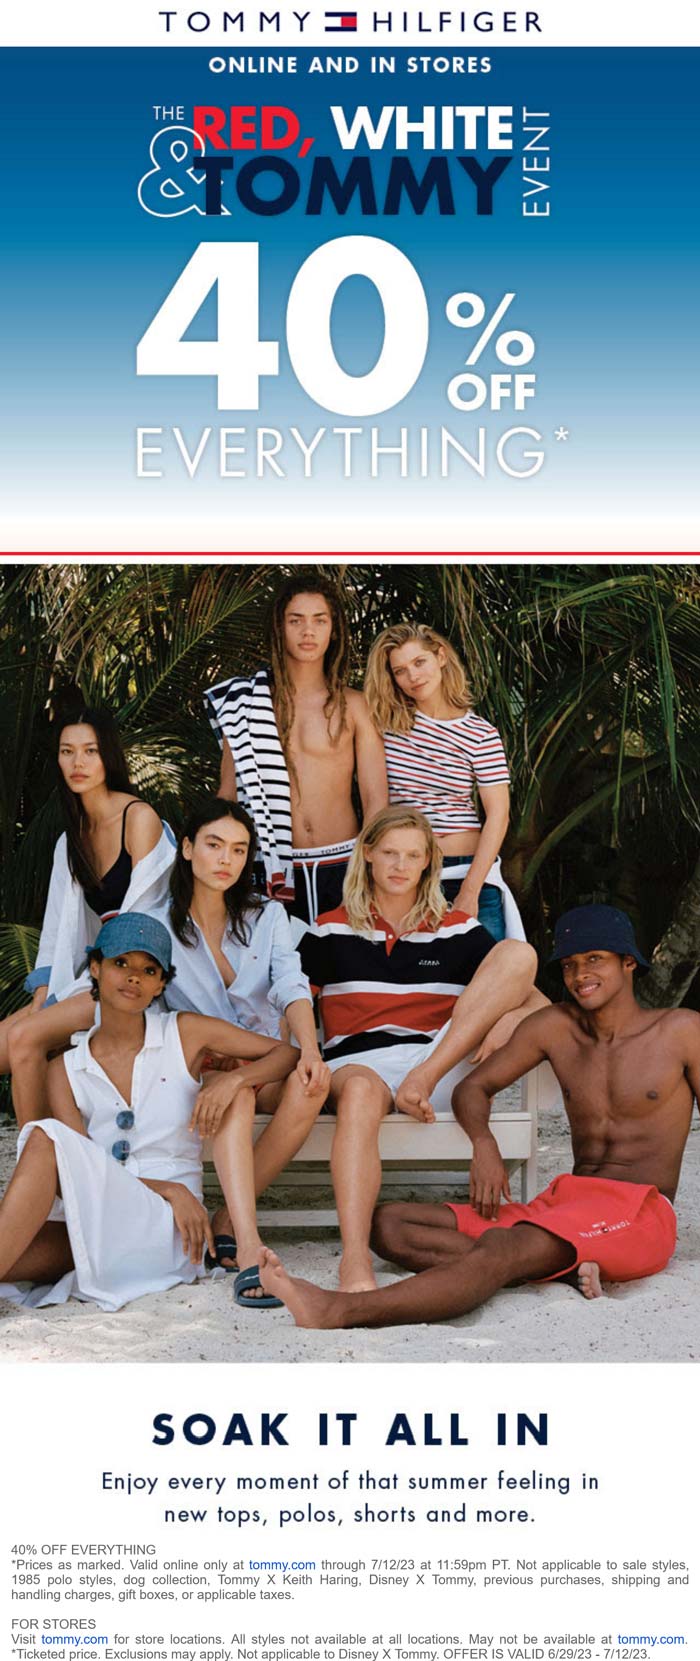 Tommy Hilfiger stores Coupon  40% off everything at Tommy Hilfiger, ditto online #tommyhilfiger 